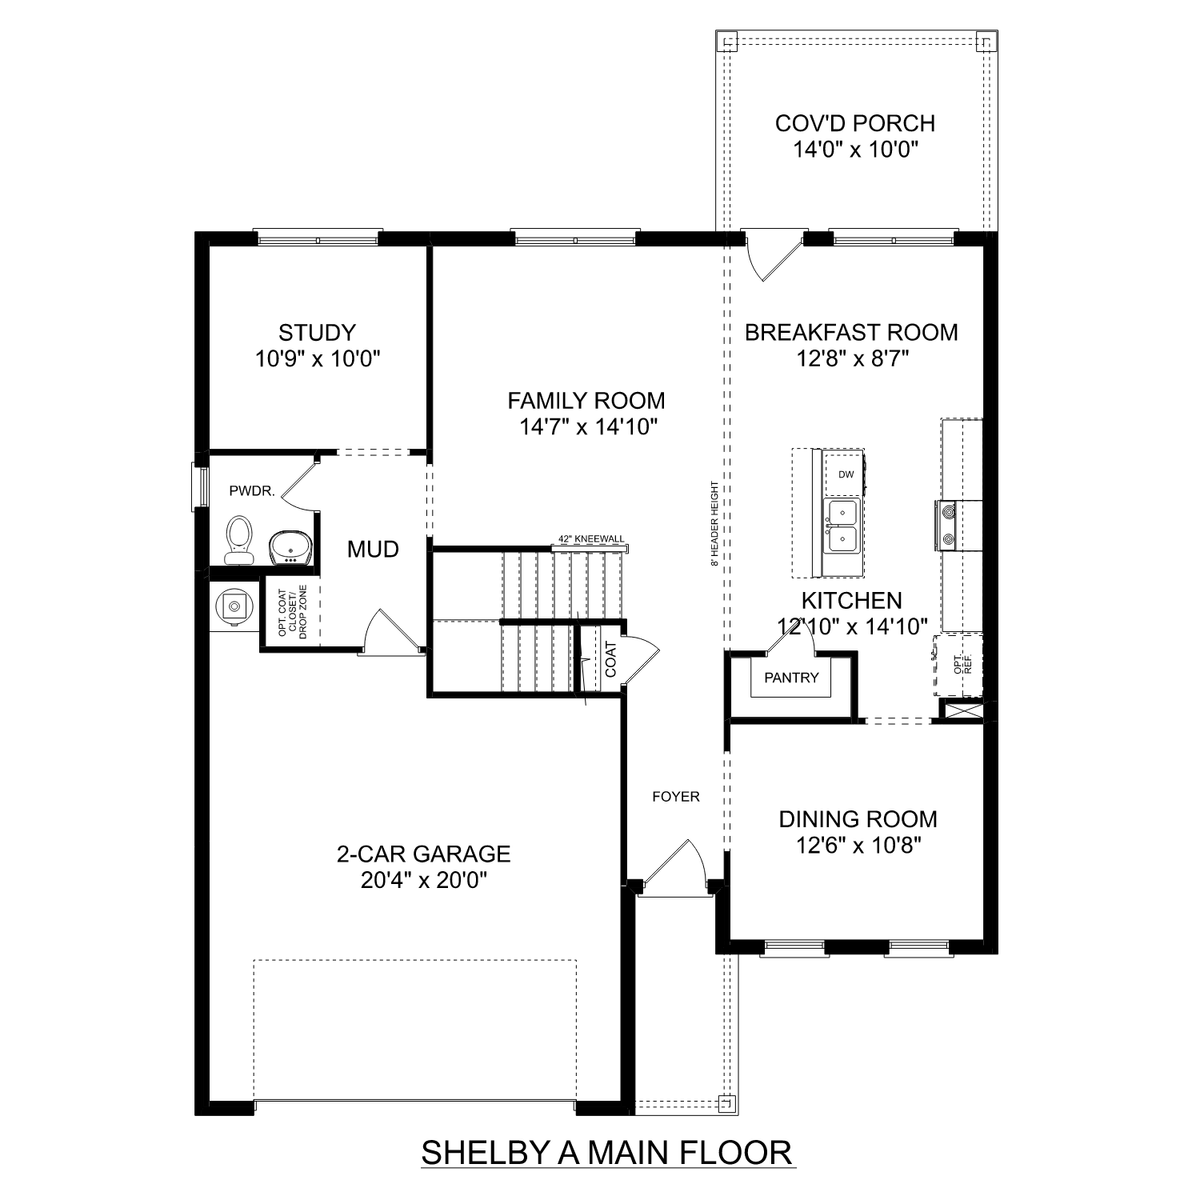 1 - The Shelby A buildable floor plan layout in Davidson Homes' Monteagle Cove community.